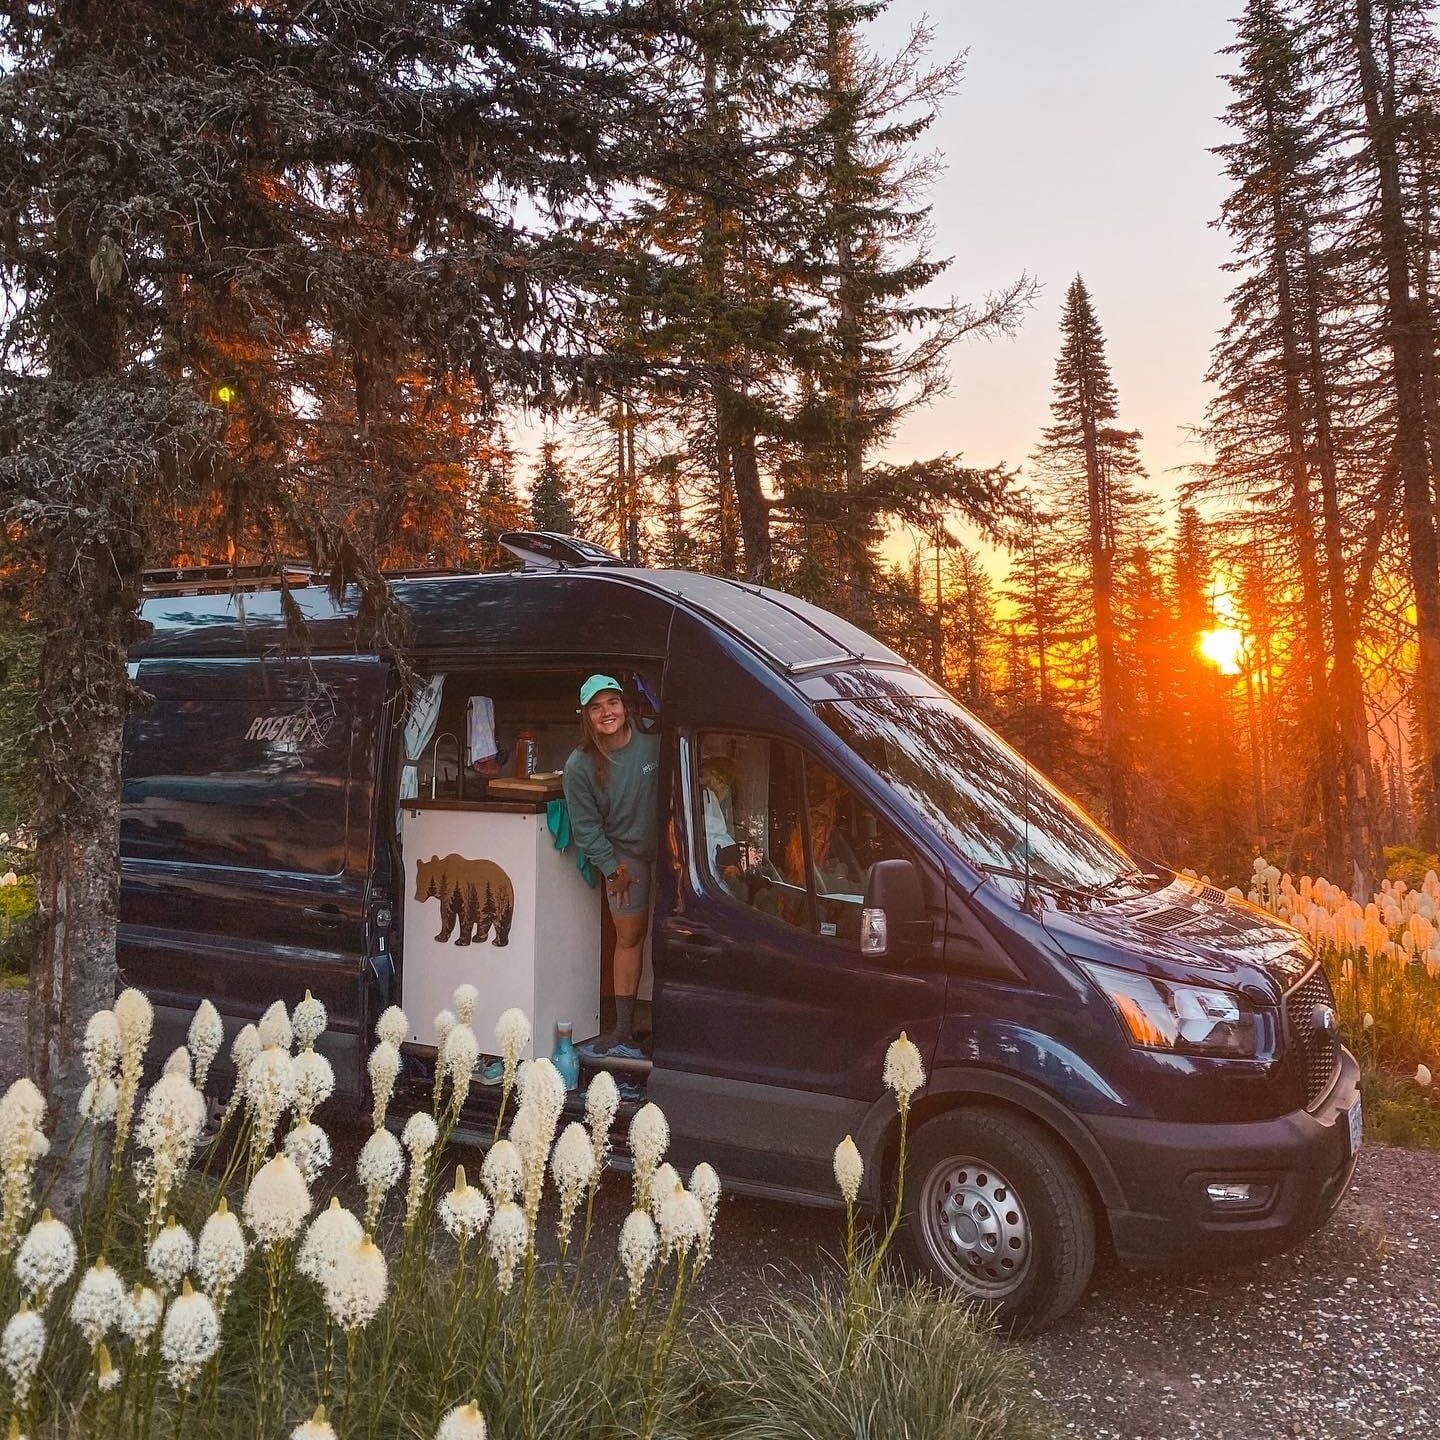 Colby with the Engineers Who Van Life Van in the Forest at Sunset